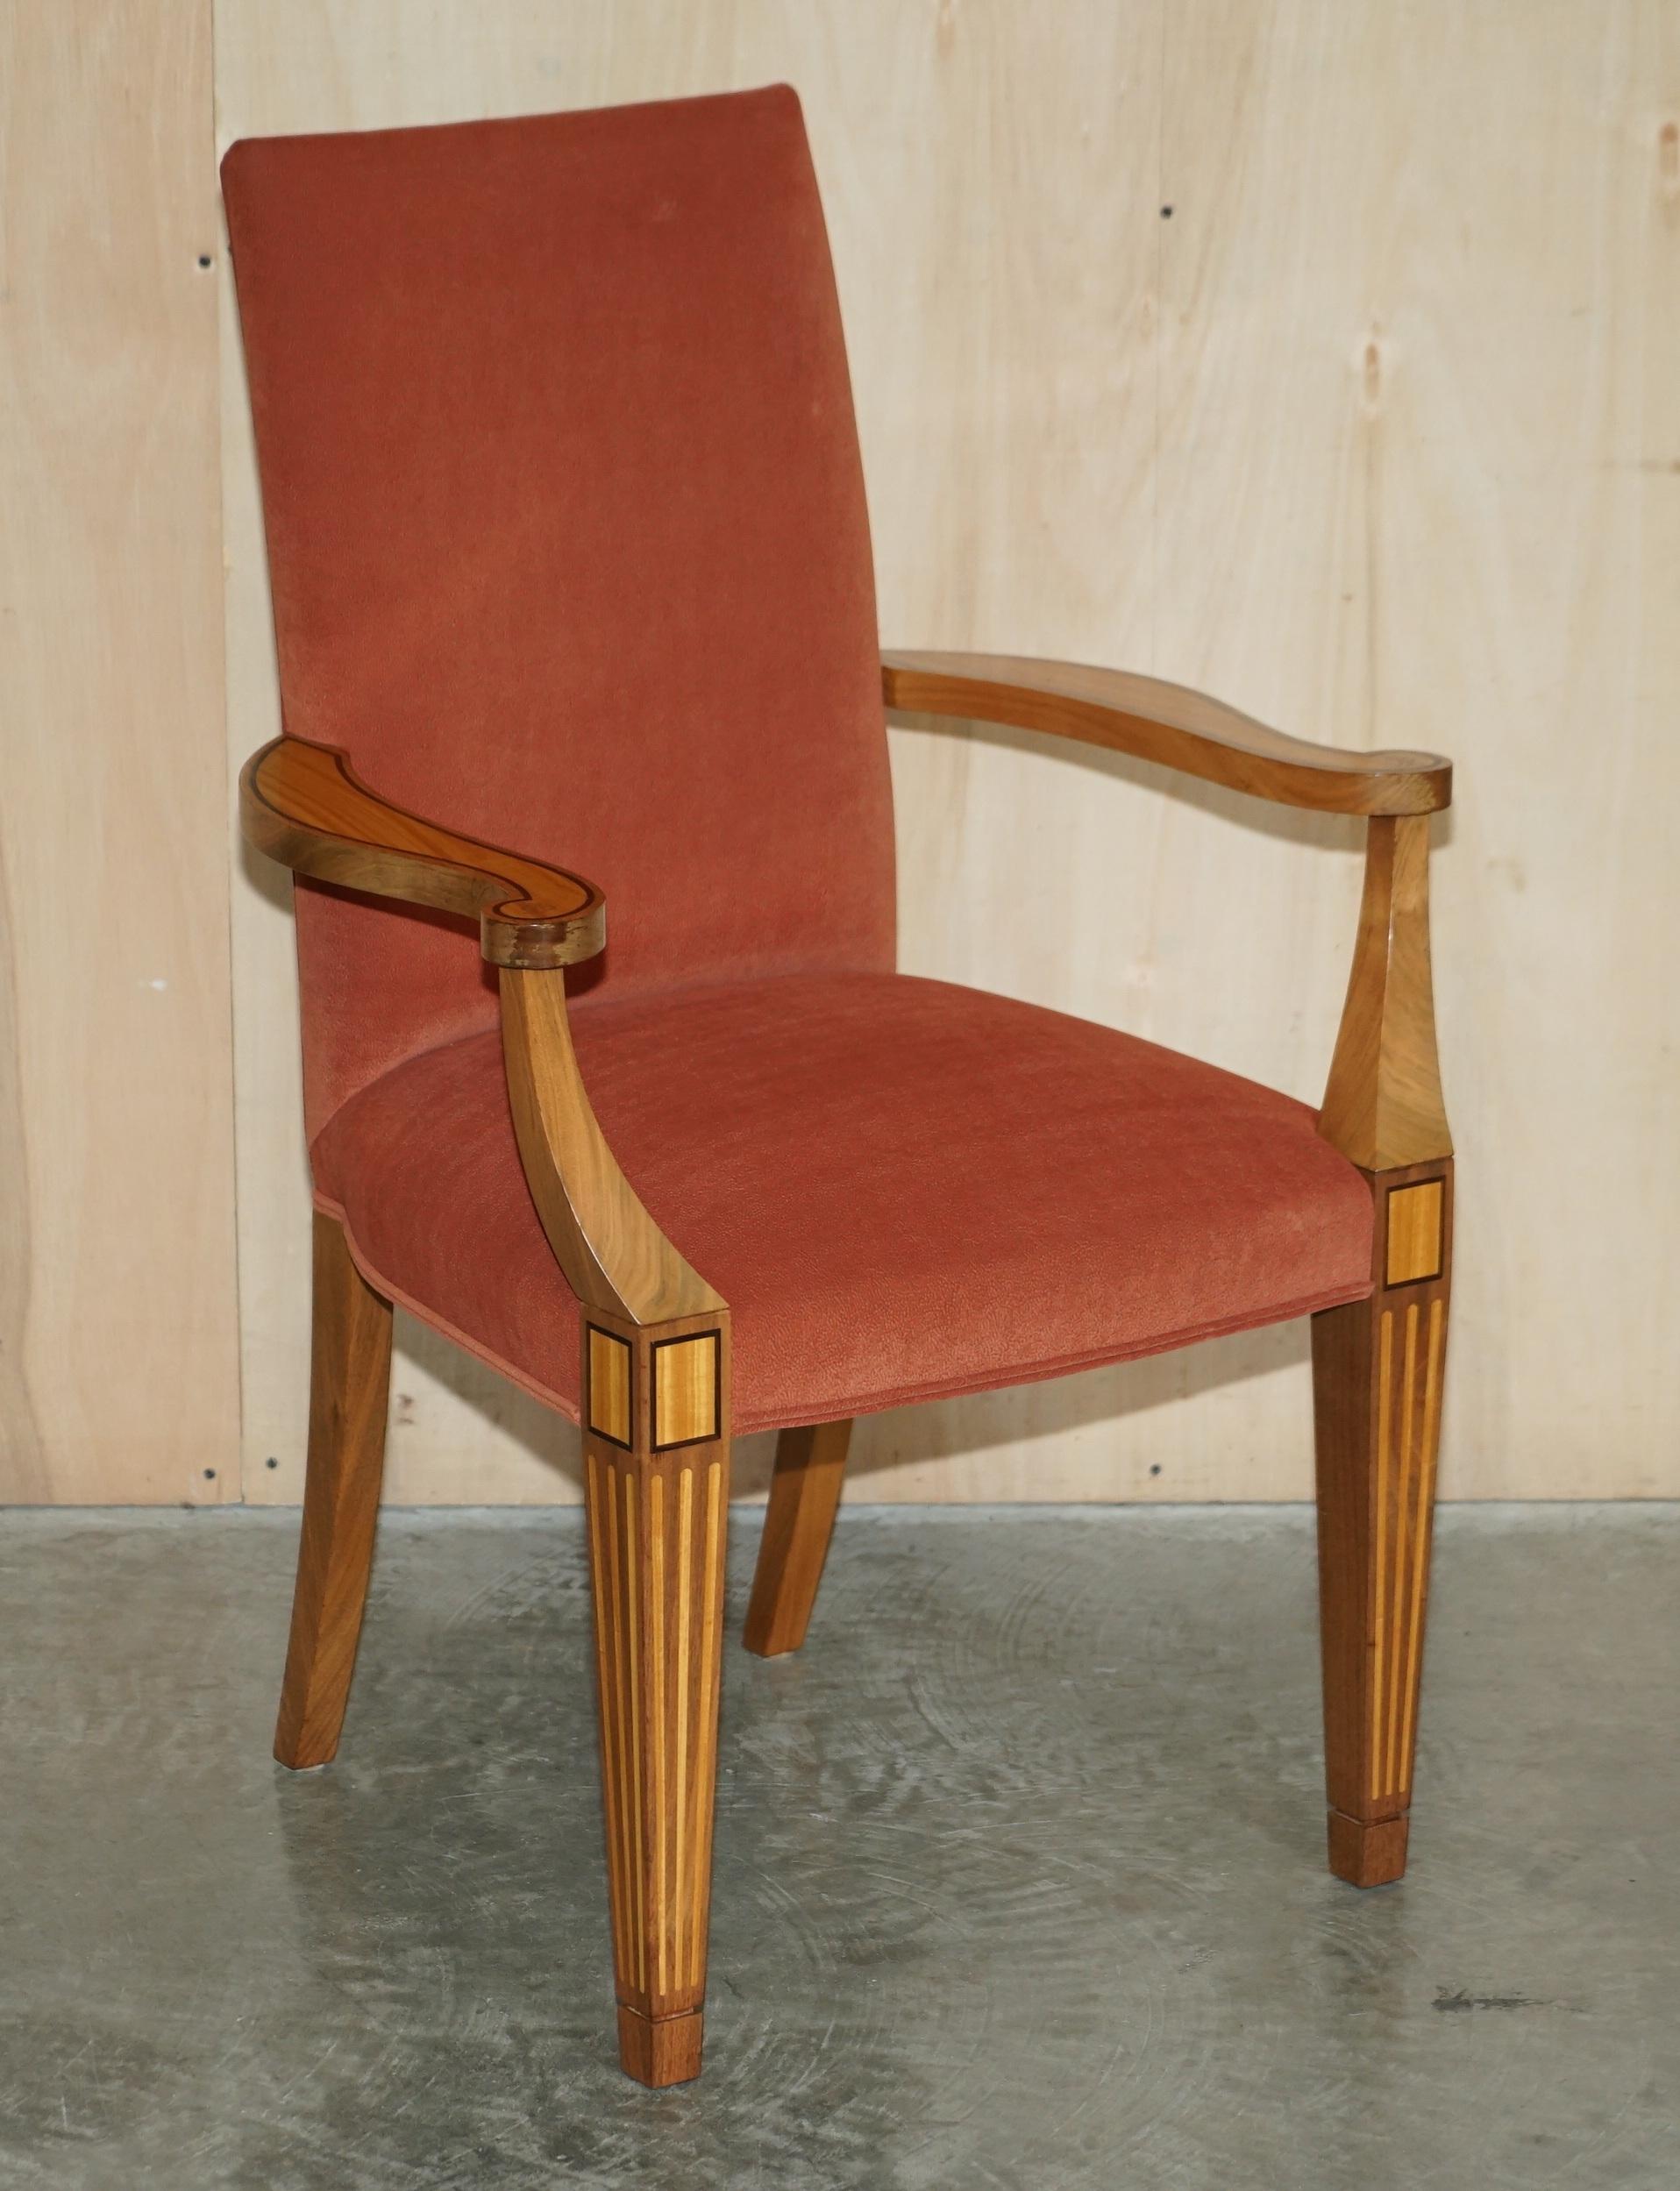 We are delighted to offer for sale this stunning pair of Viscount David Linley occasional carved armchairs in satinwood and walnut 

A very well made and decorative pair of occasional armchairs, they can be used in a library or study, either side